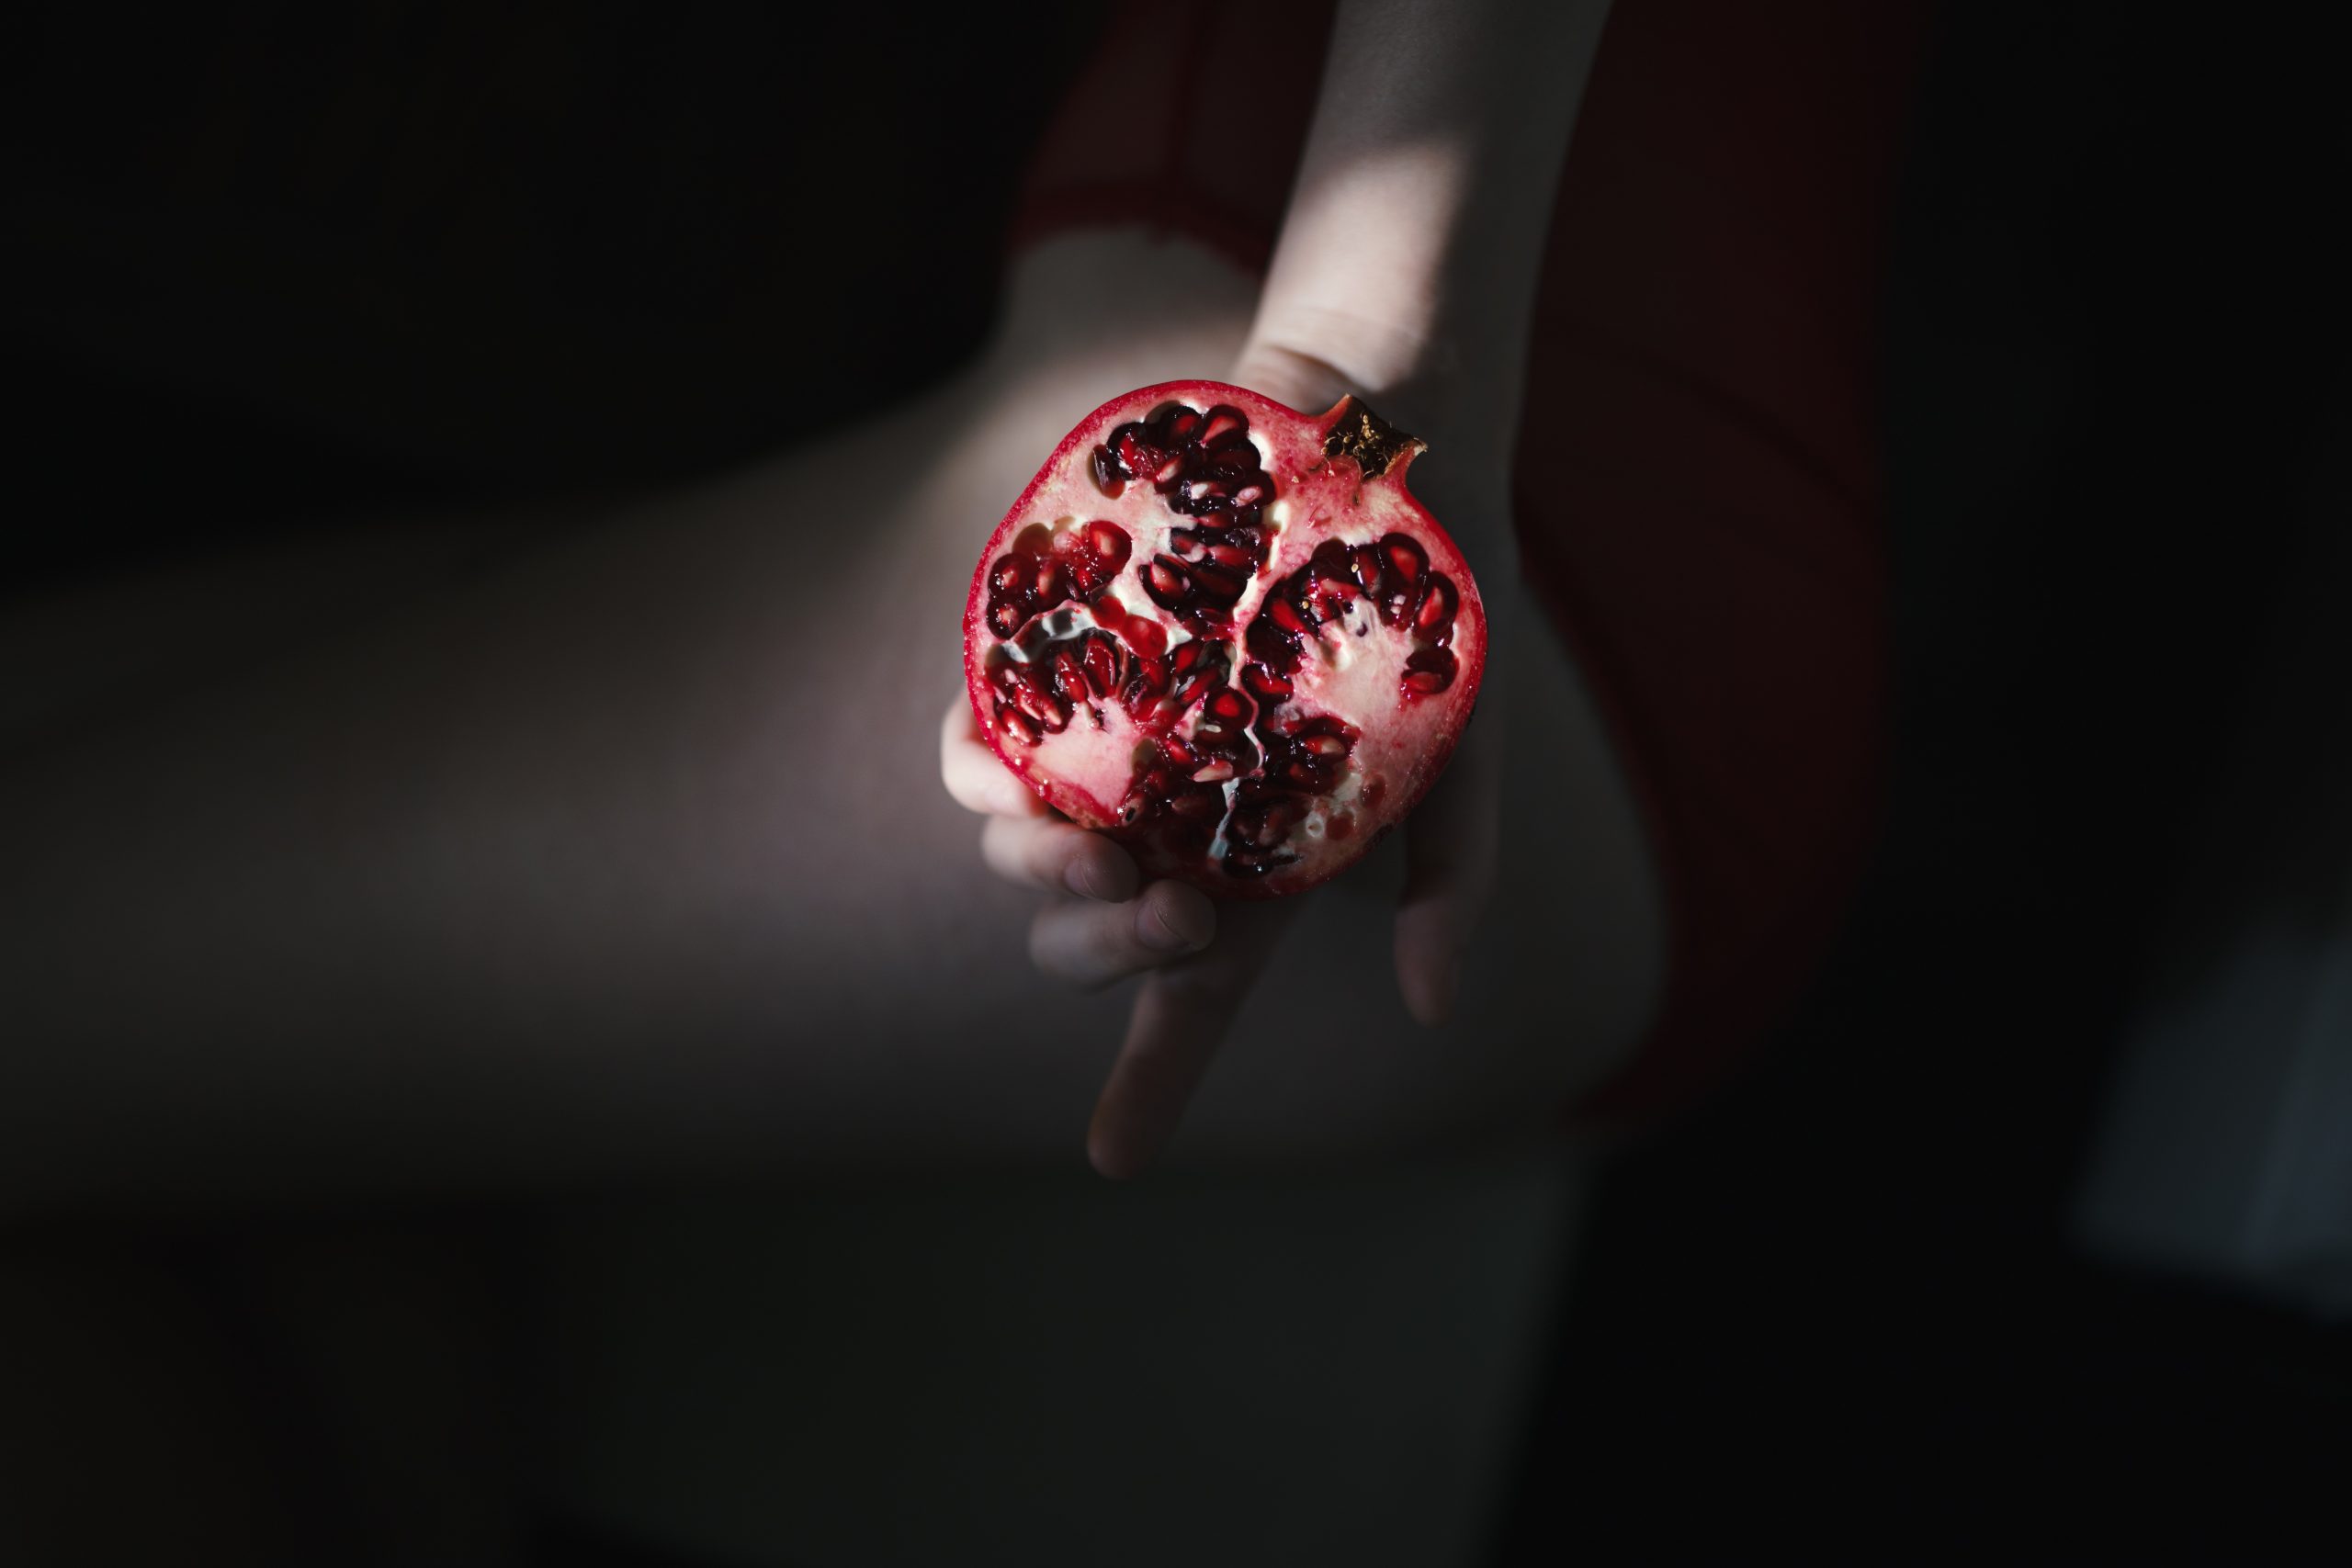 person holding red pomegranate